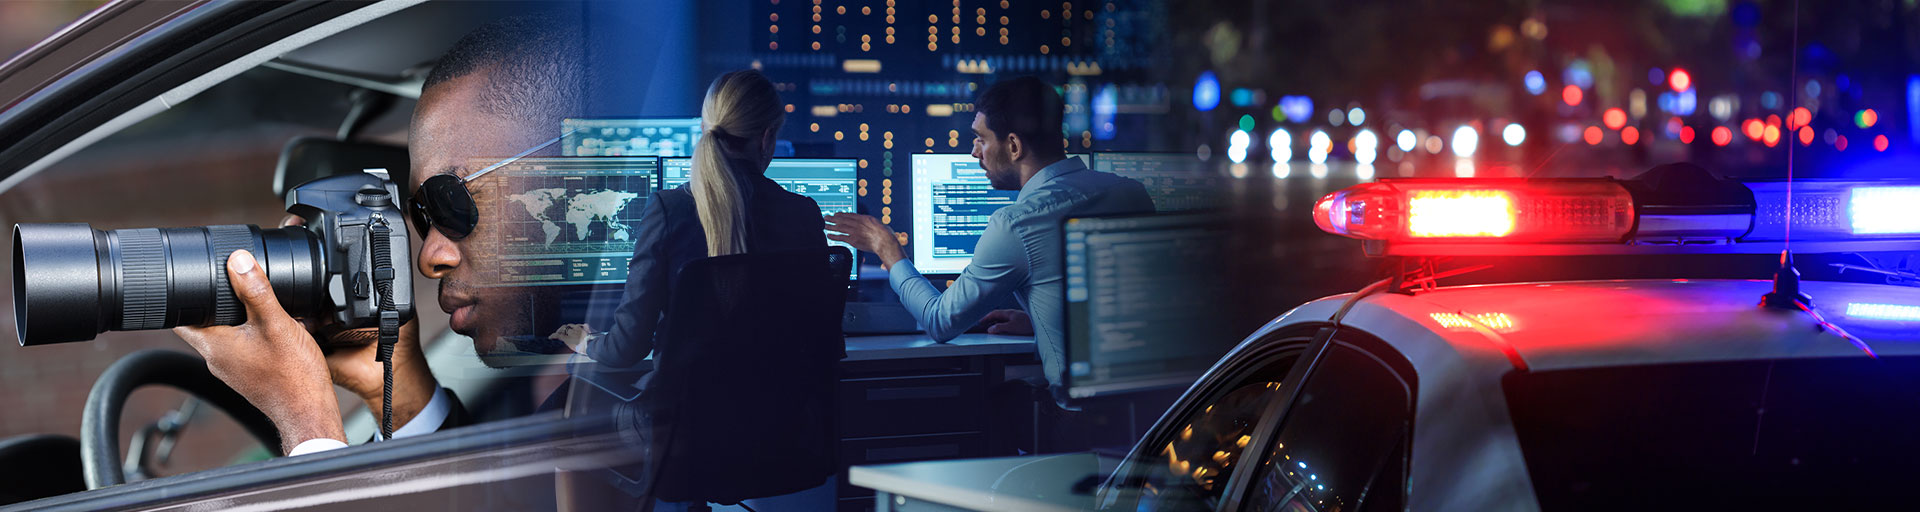 Man and woman working on computers and  Police Car Lights 